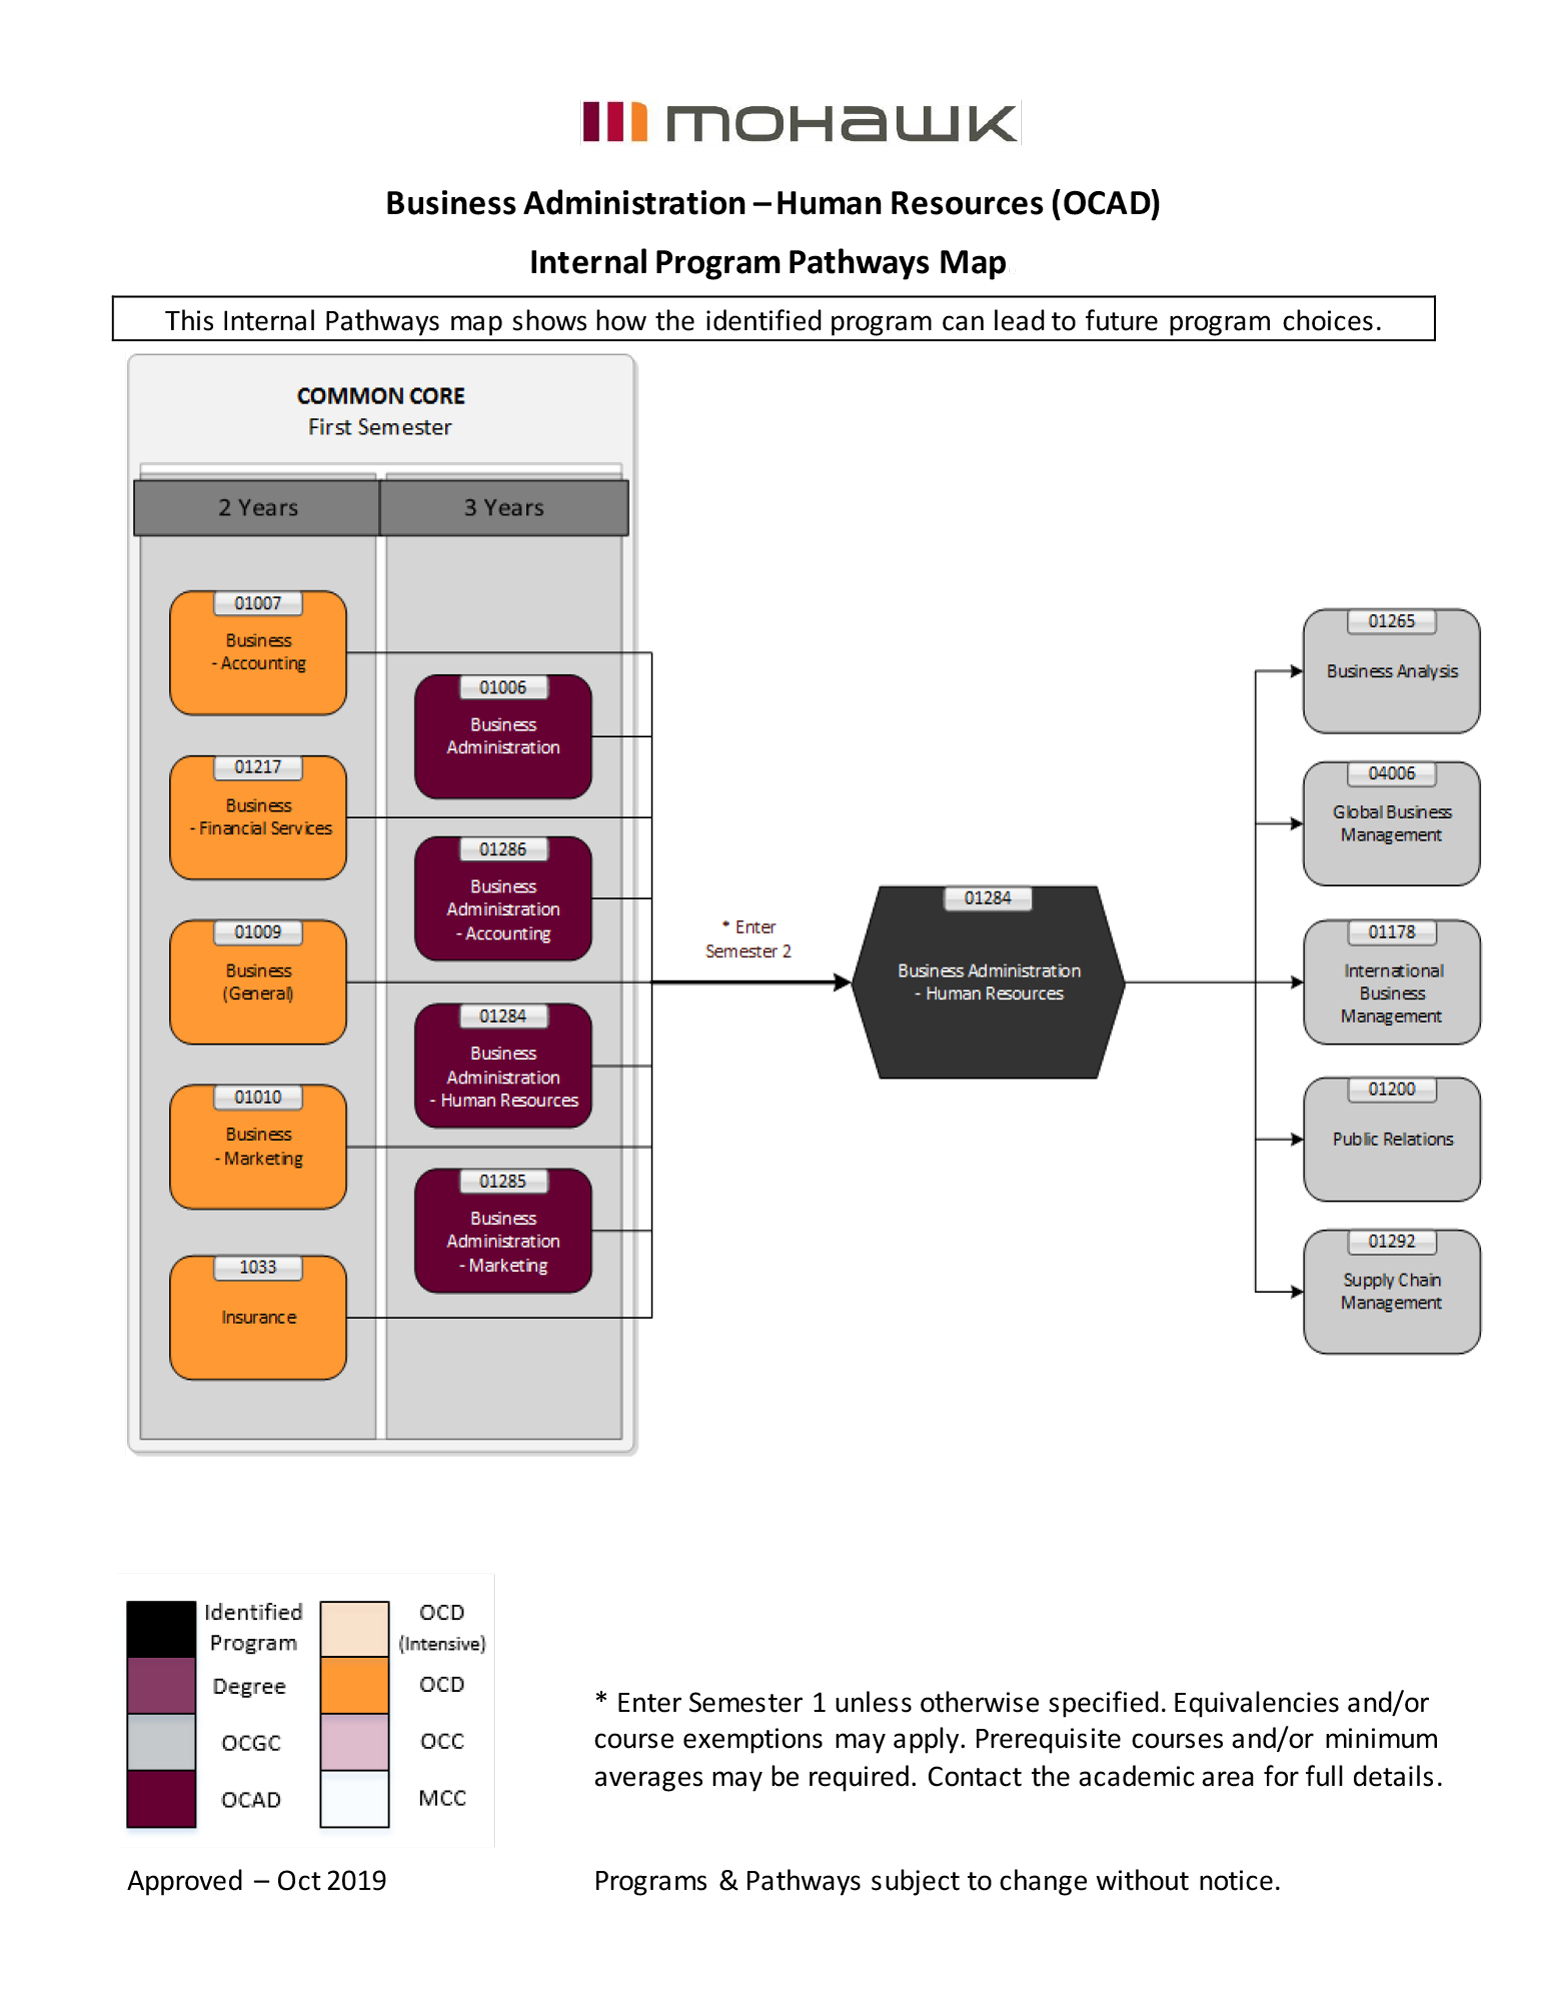 Business Administration Human Resources pathways map